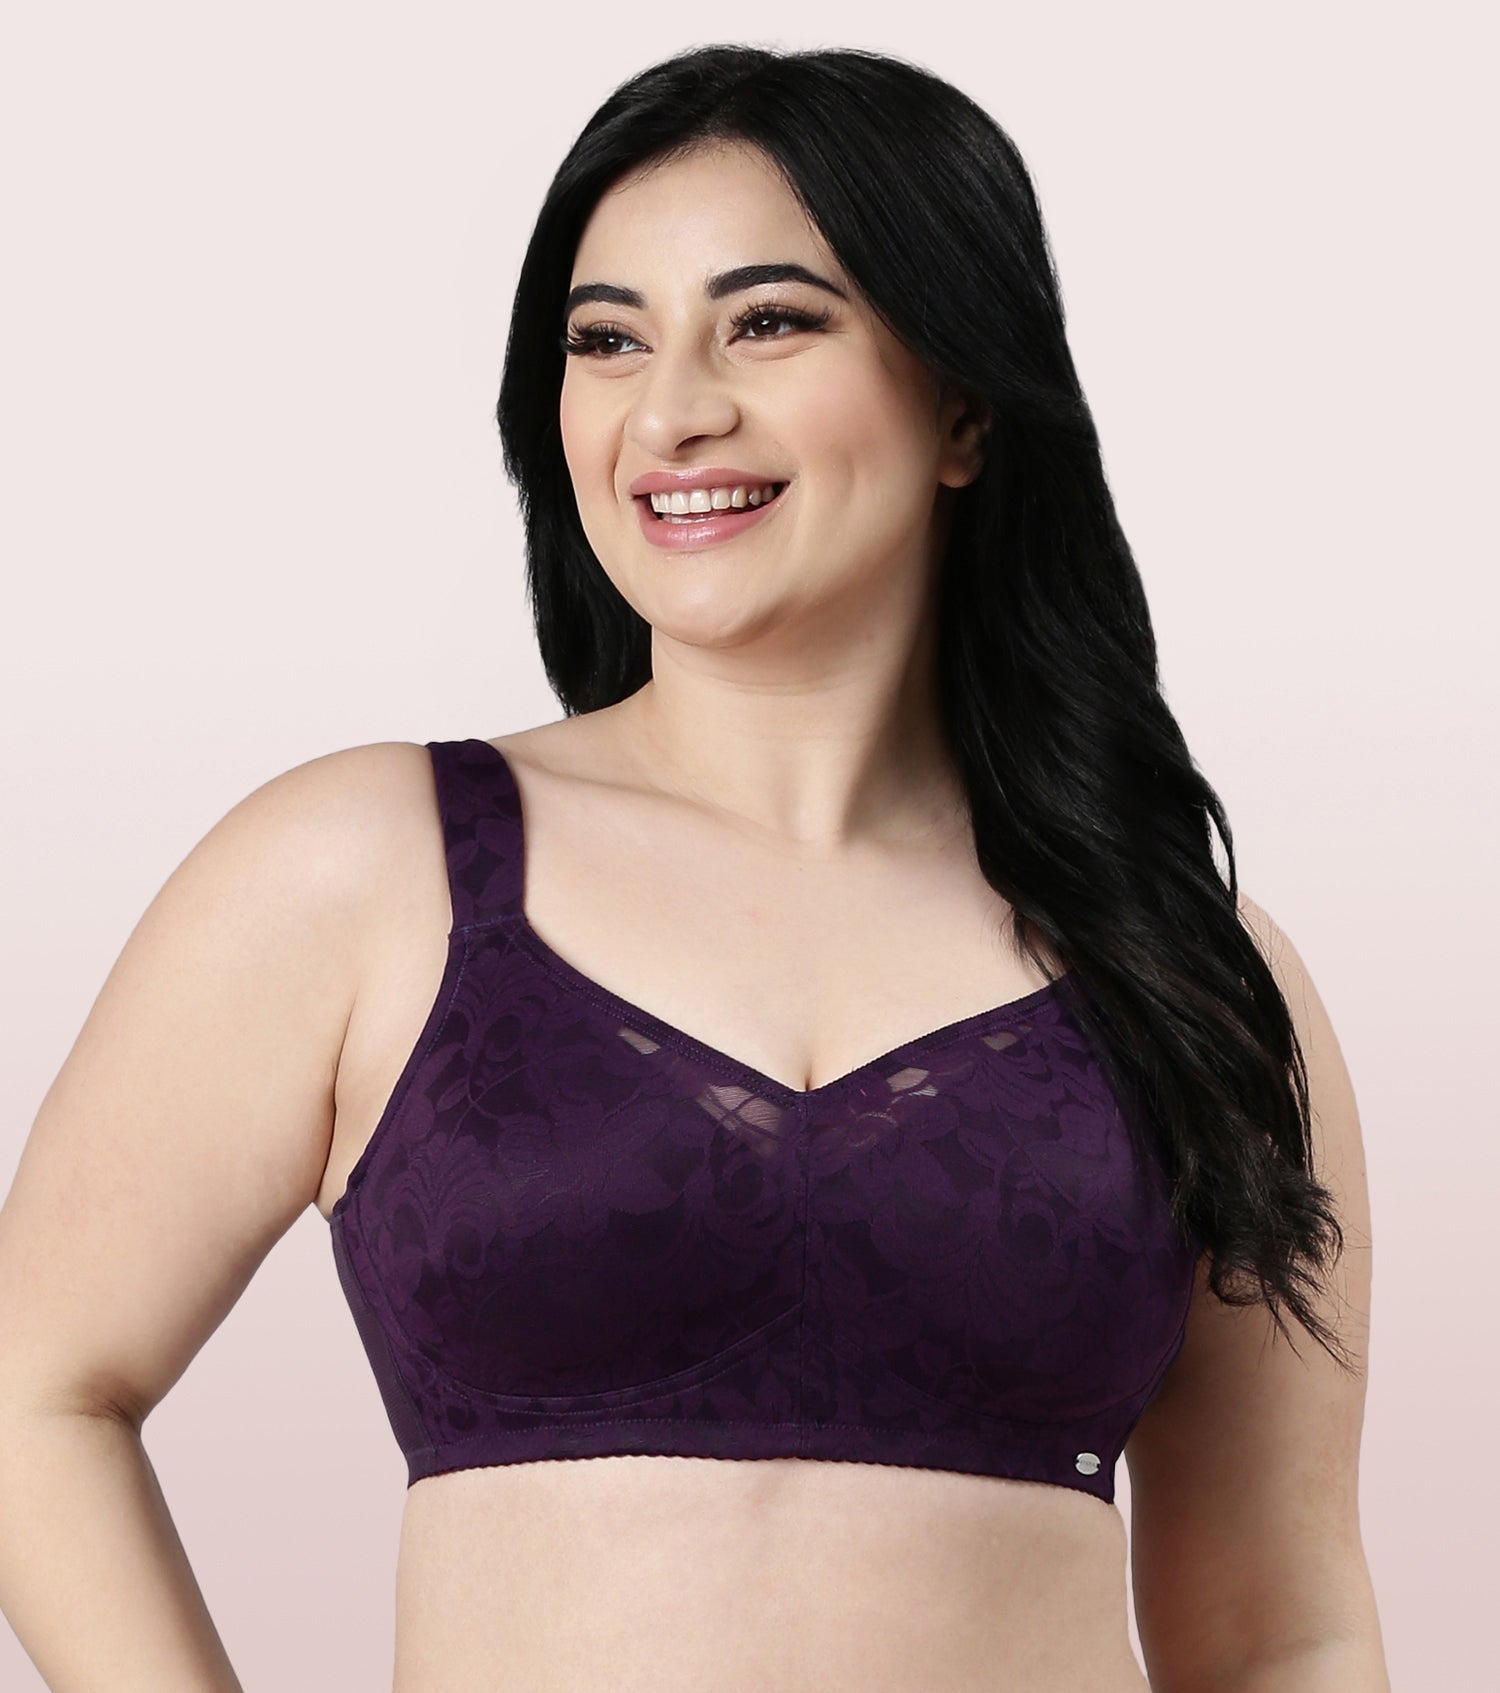 Enamor India on X: Always on the lookout for bras that offer